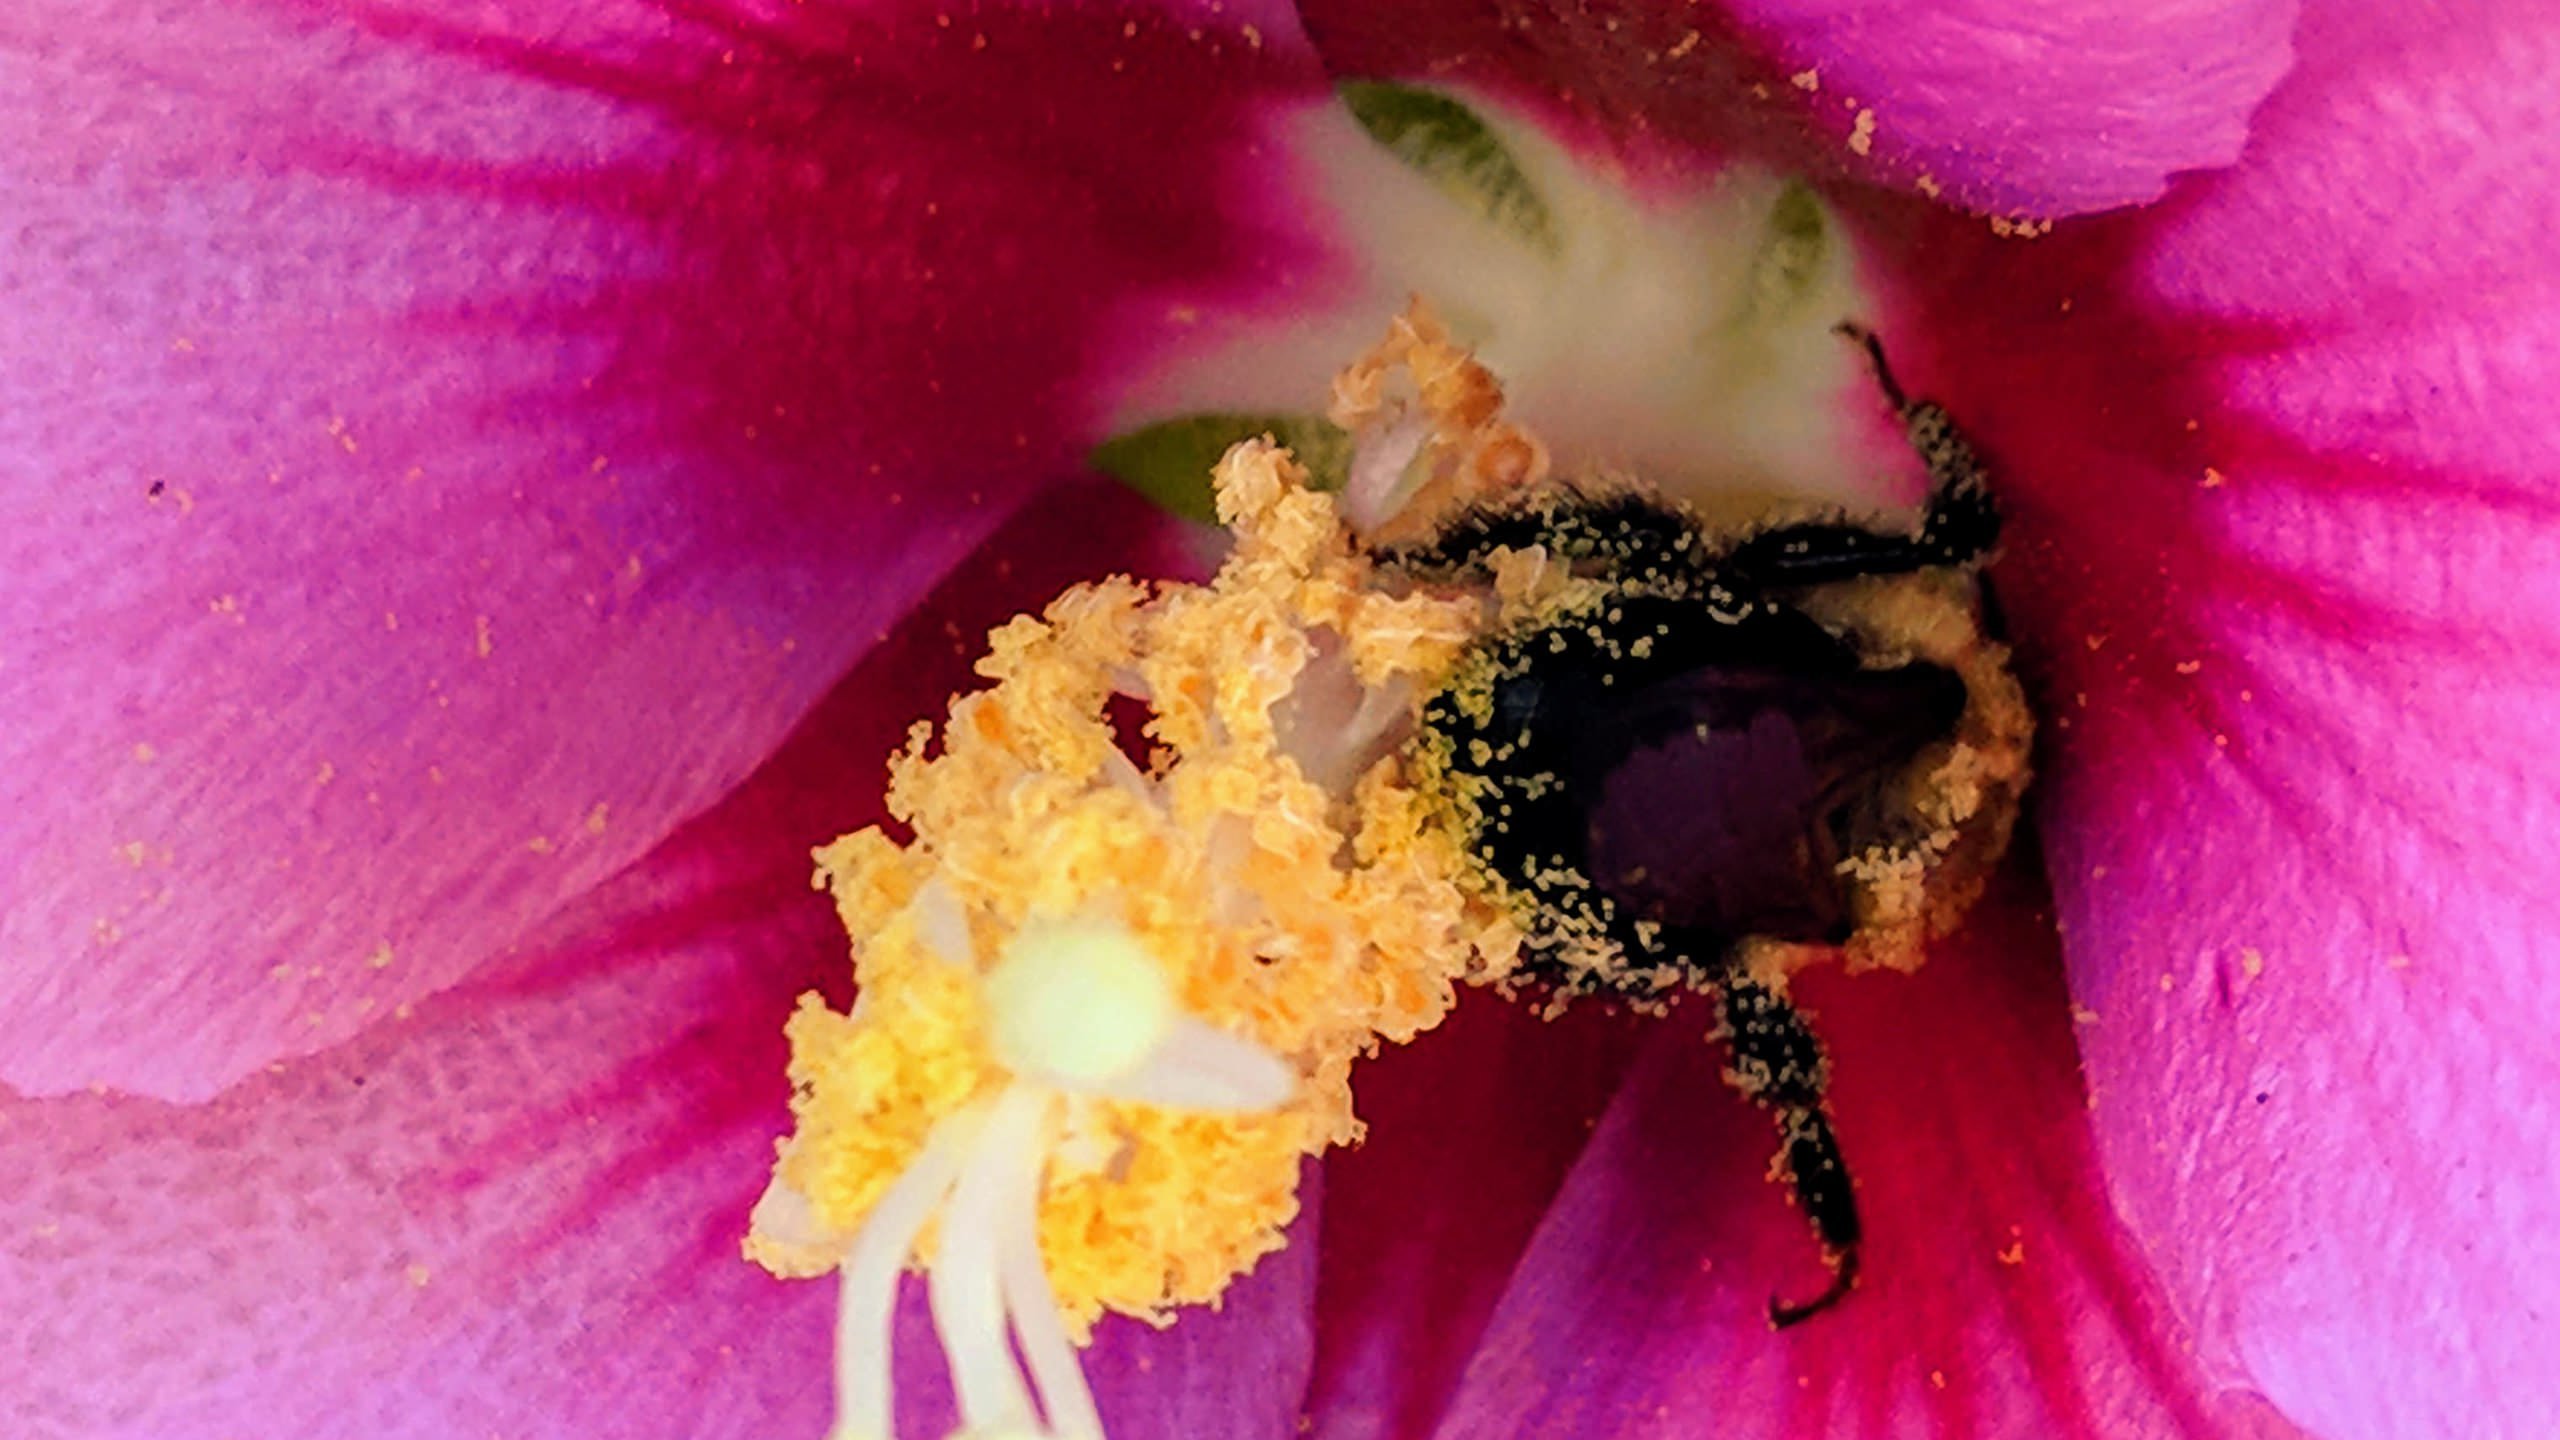 Pollen 4K wallpaper for your desktop or mobile screen free and easy to download